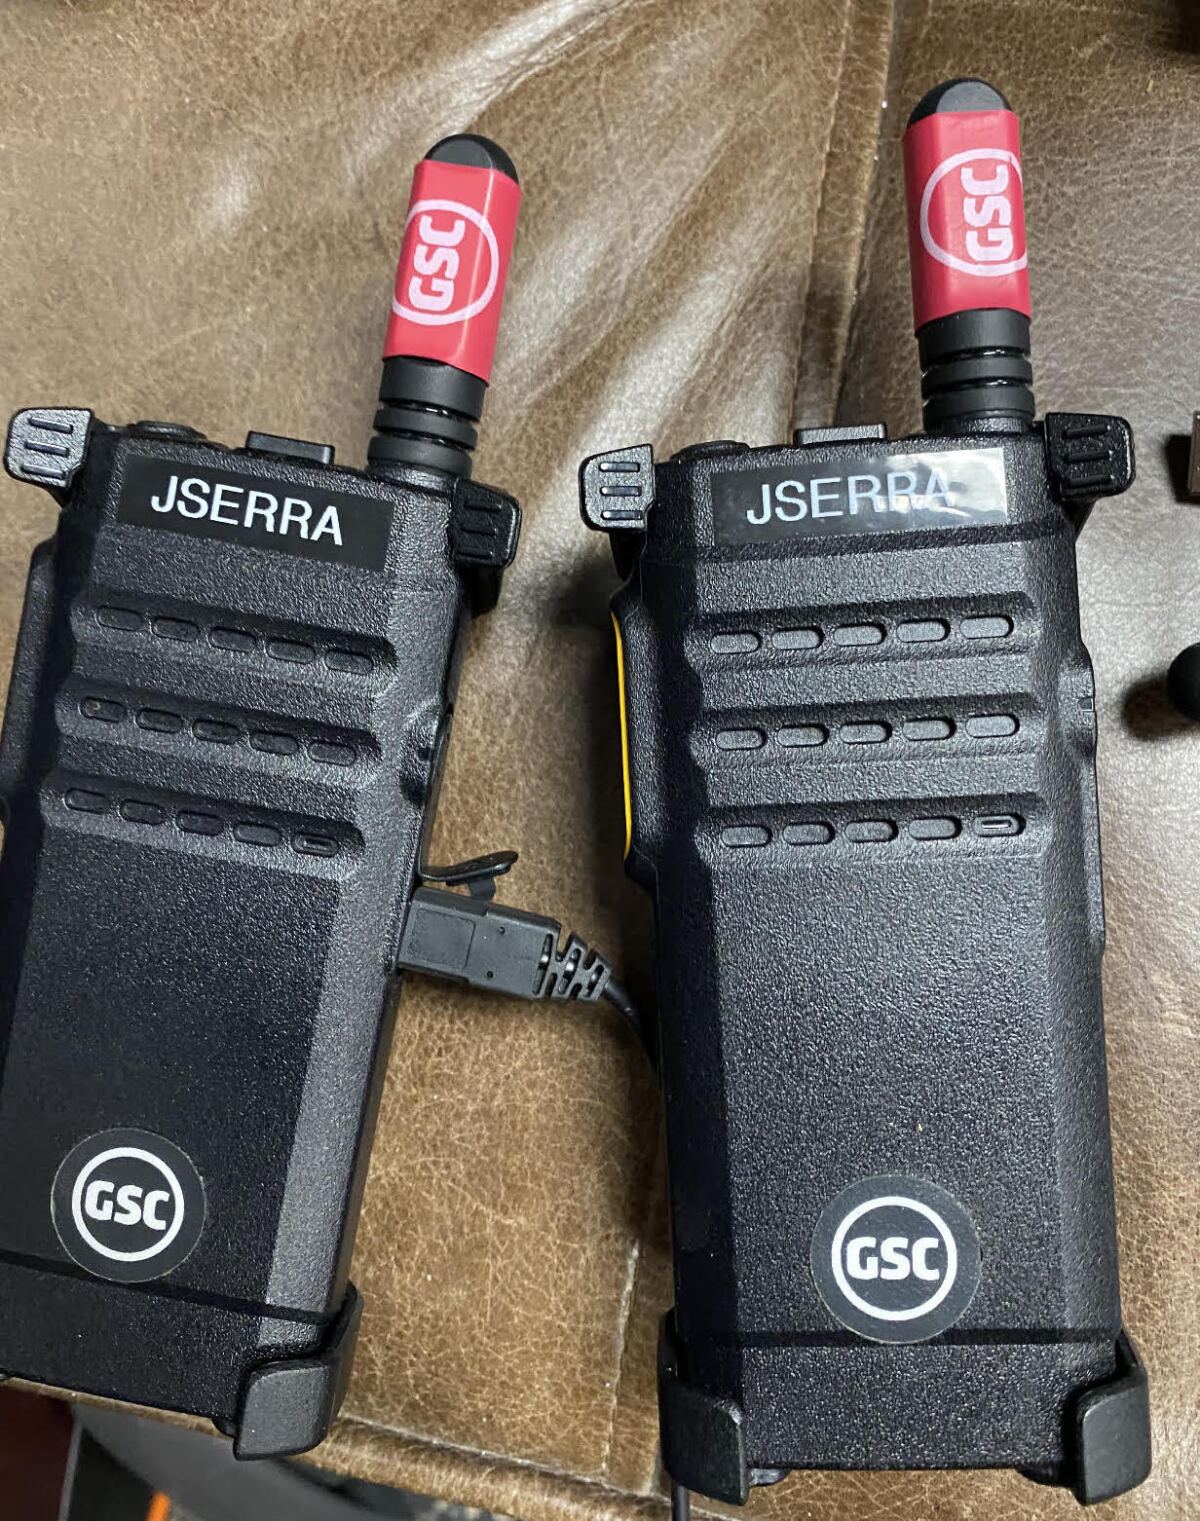 The JSerra walkie talkie that will be used to communicate with catcher for the 2024 season under new rule change.